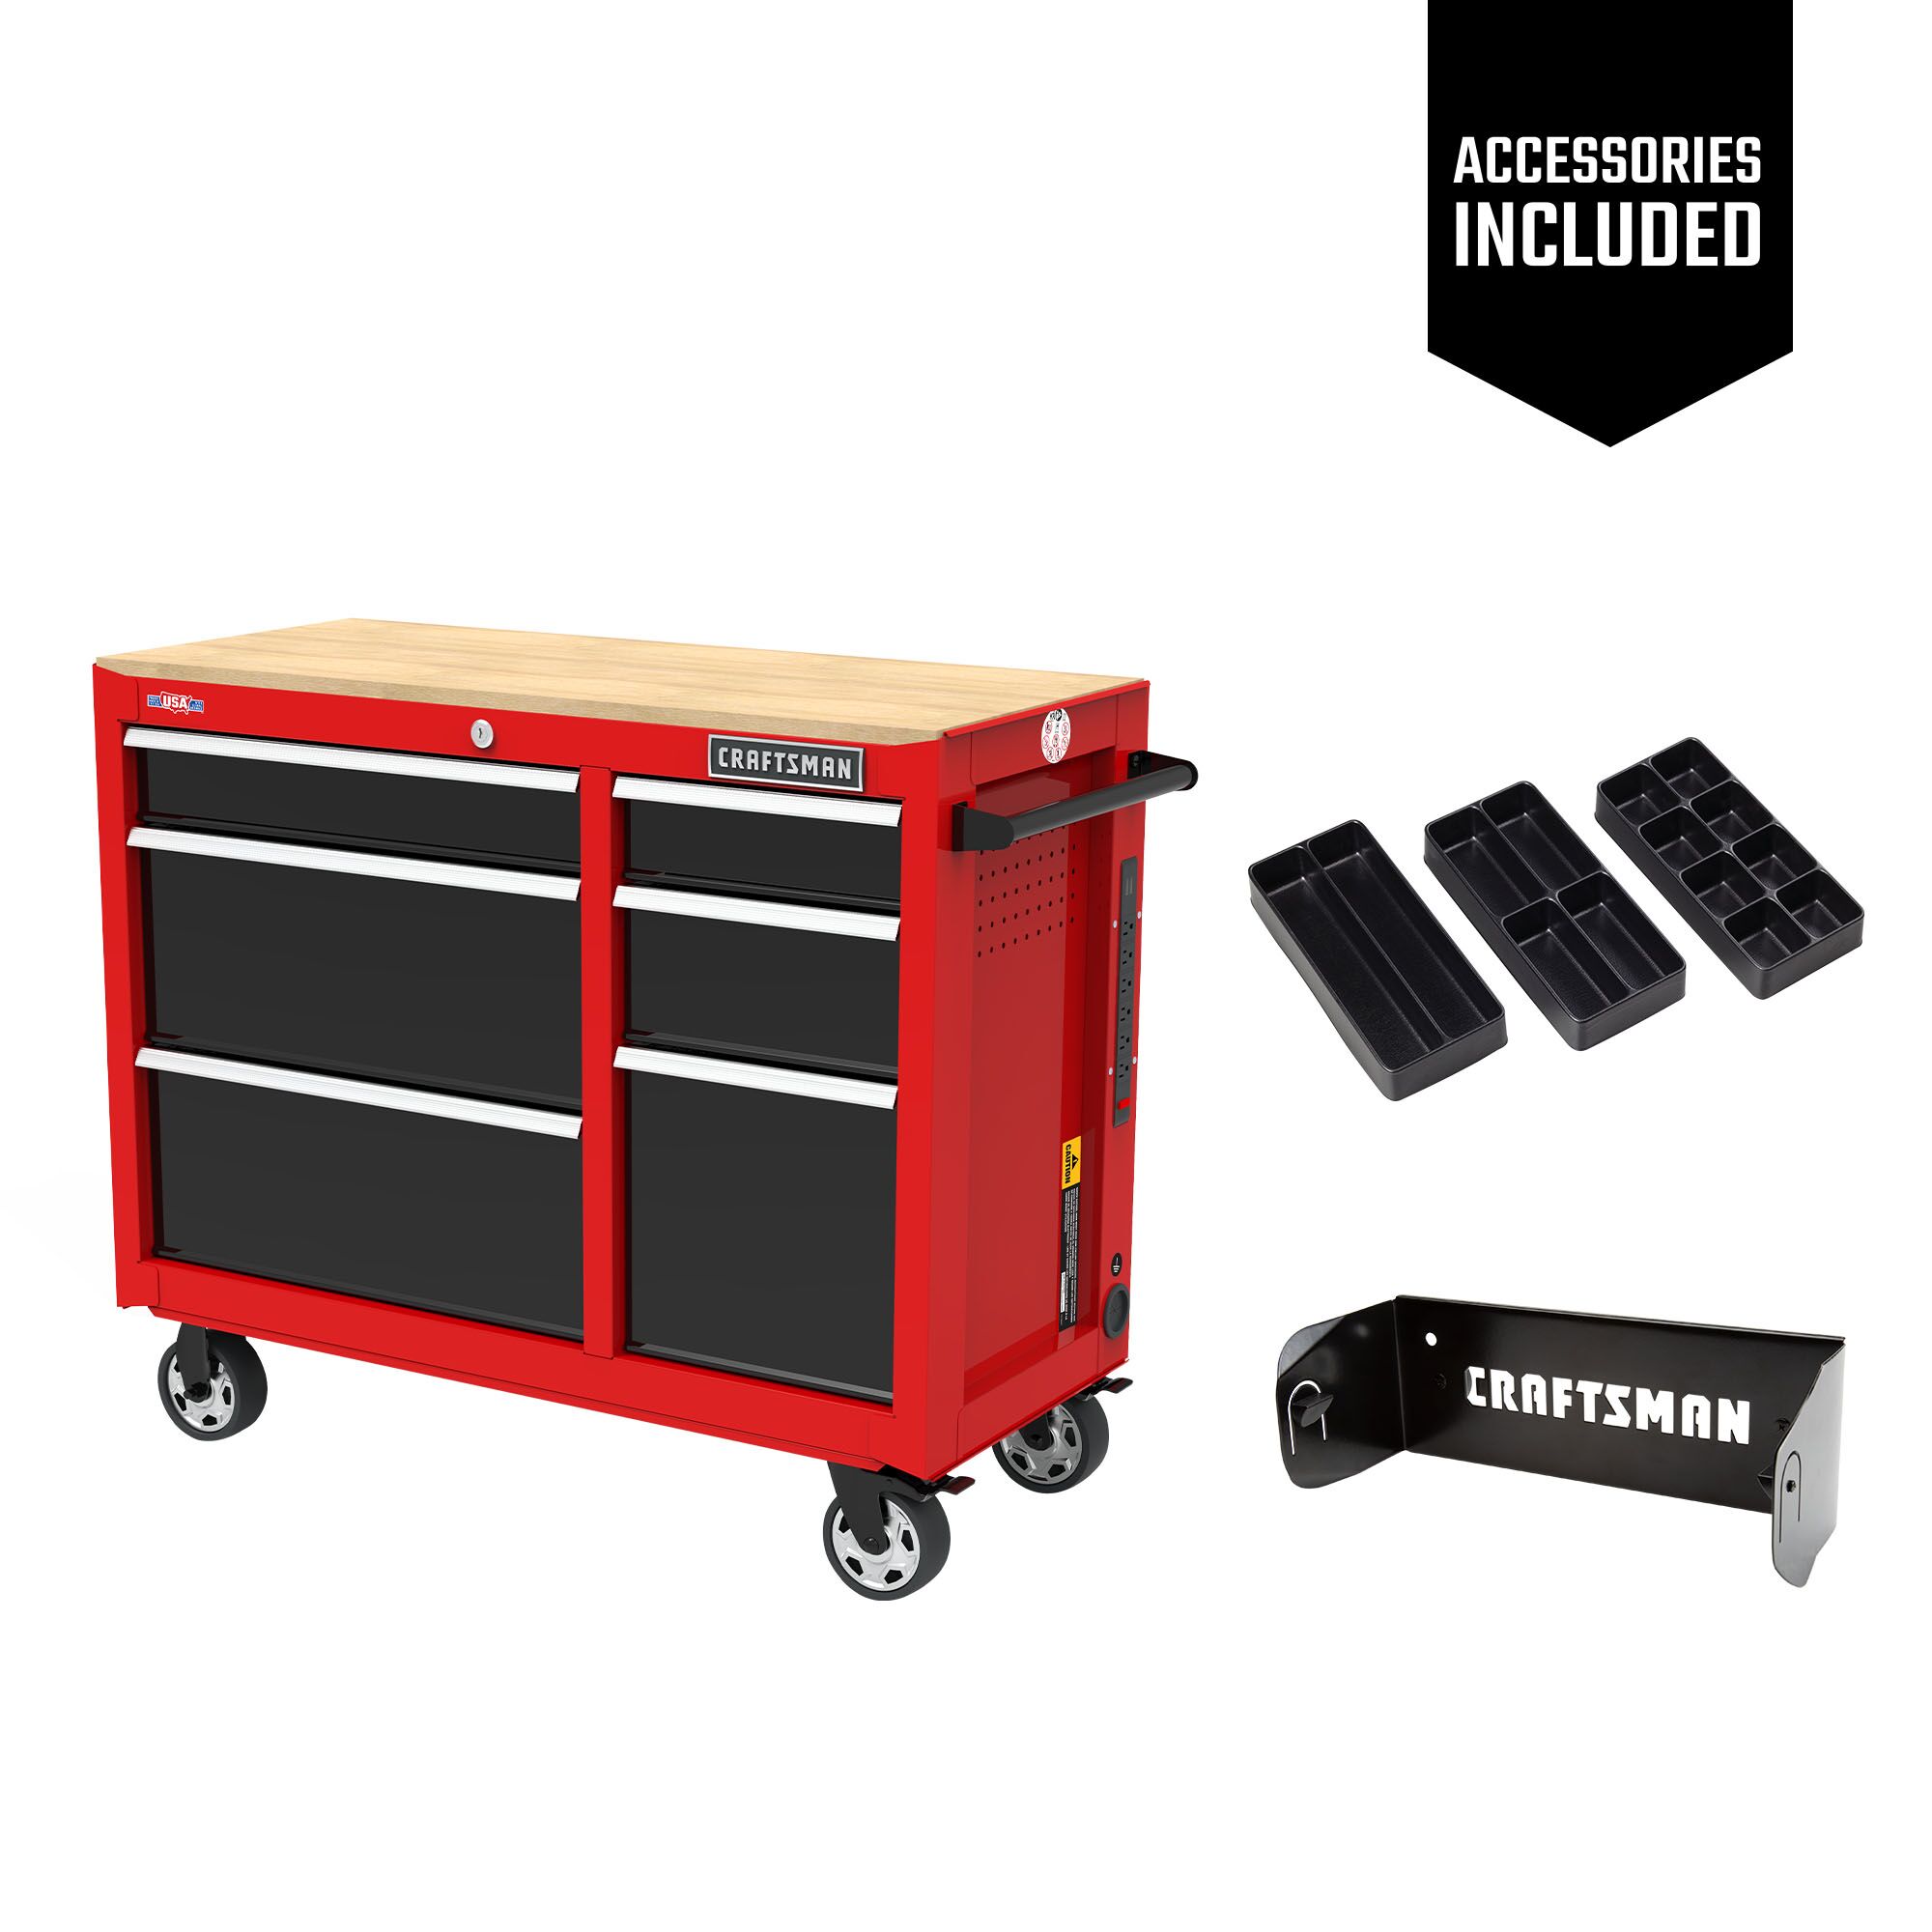 One red CRAFTSMAN 41 inch Wide 6-Drawer Mobile Workbench with three black Cabinet Drawer Trays and one black Magnetic Paper Towel Holder included